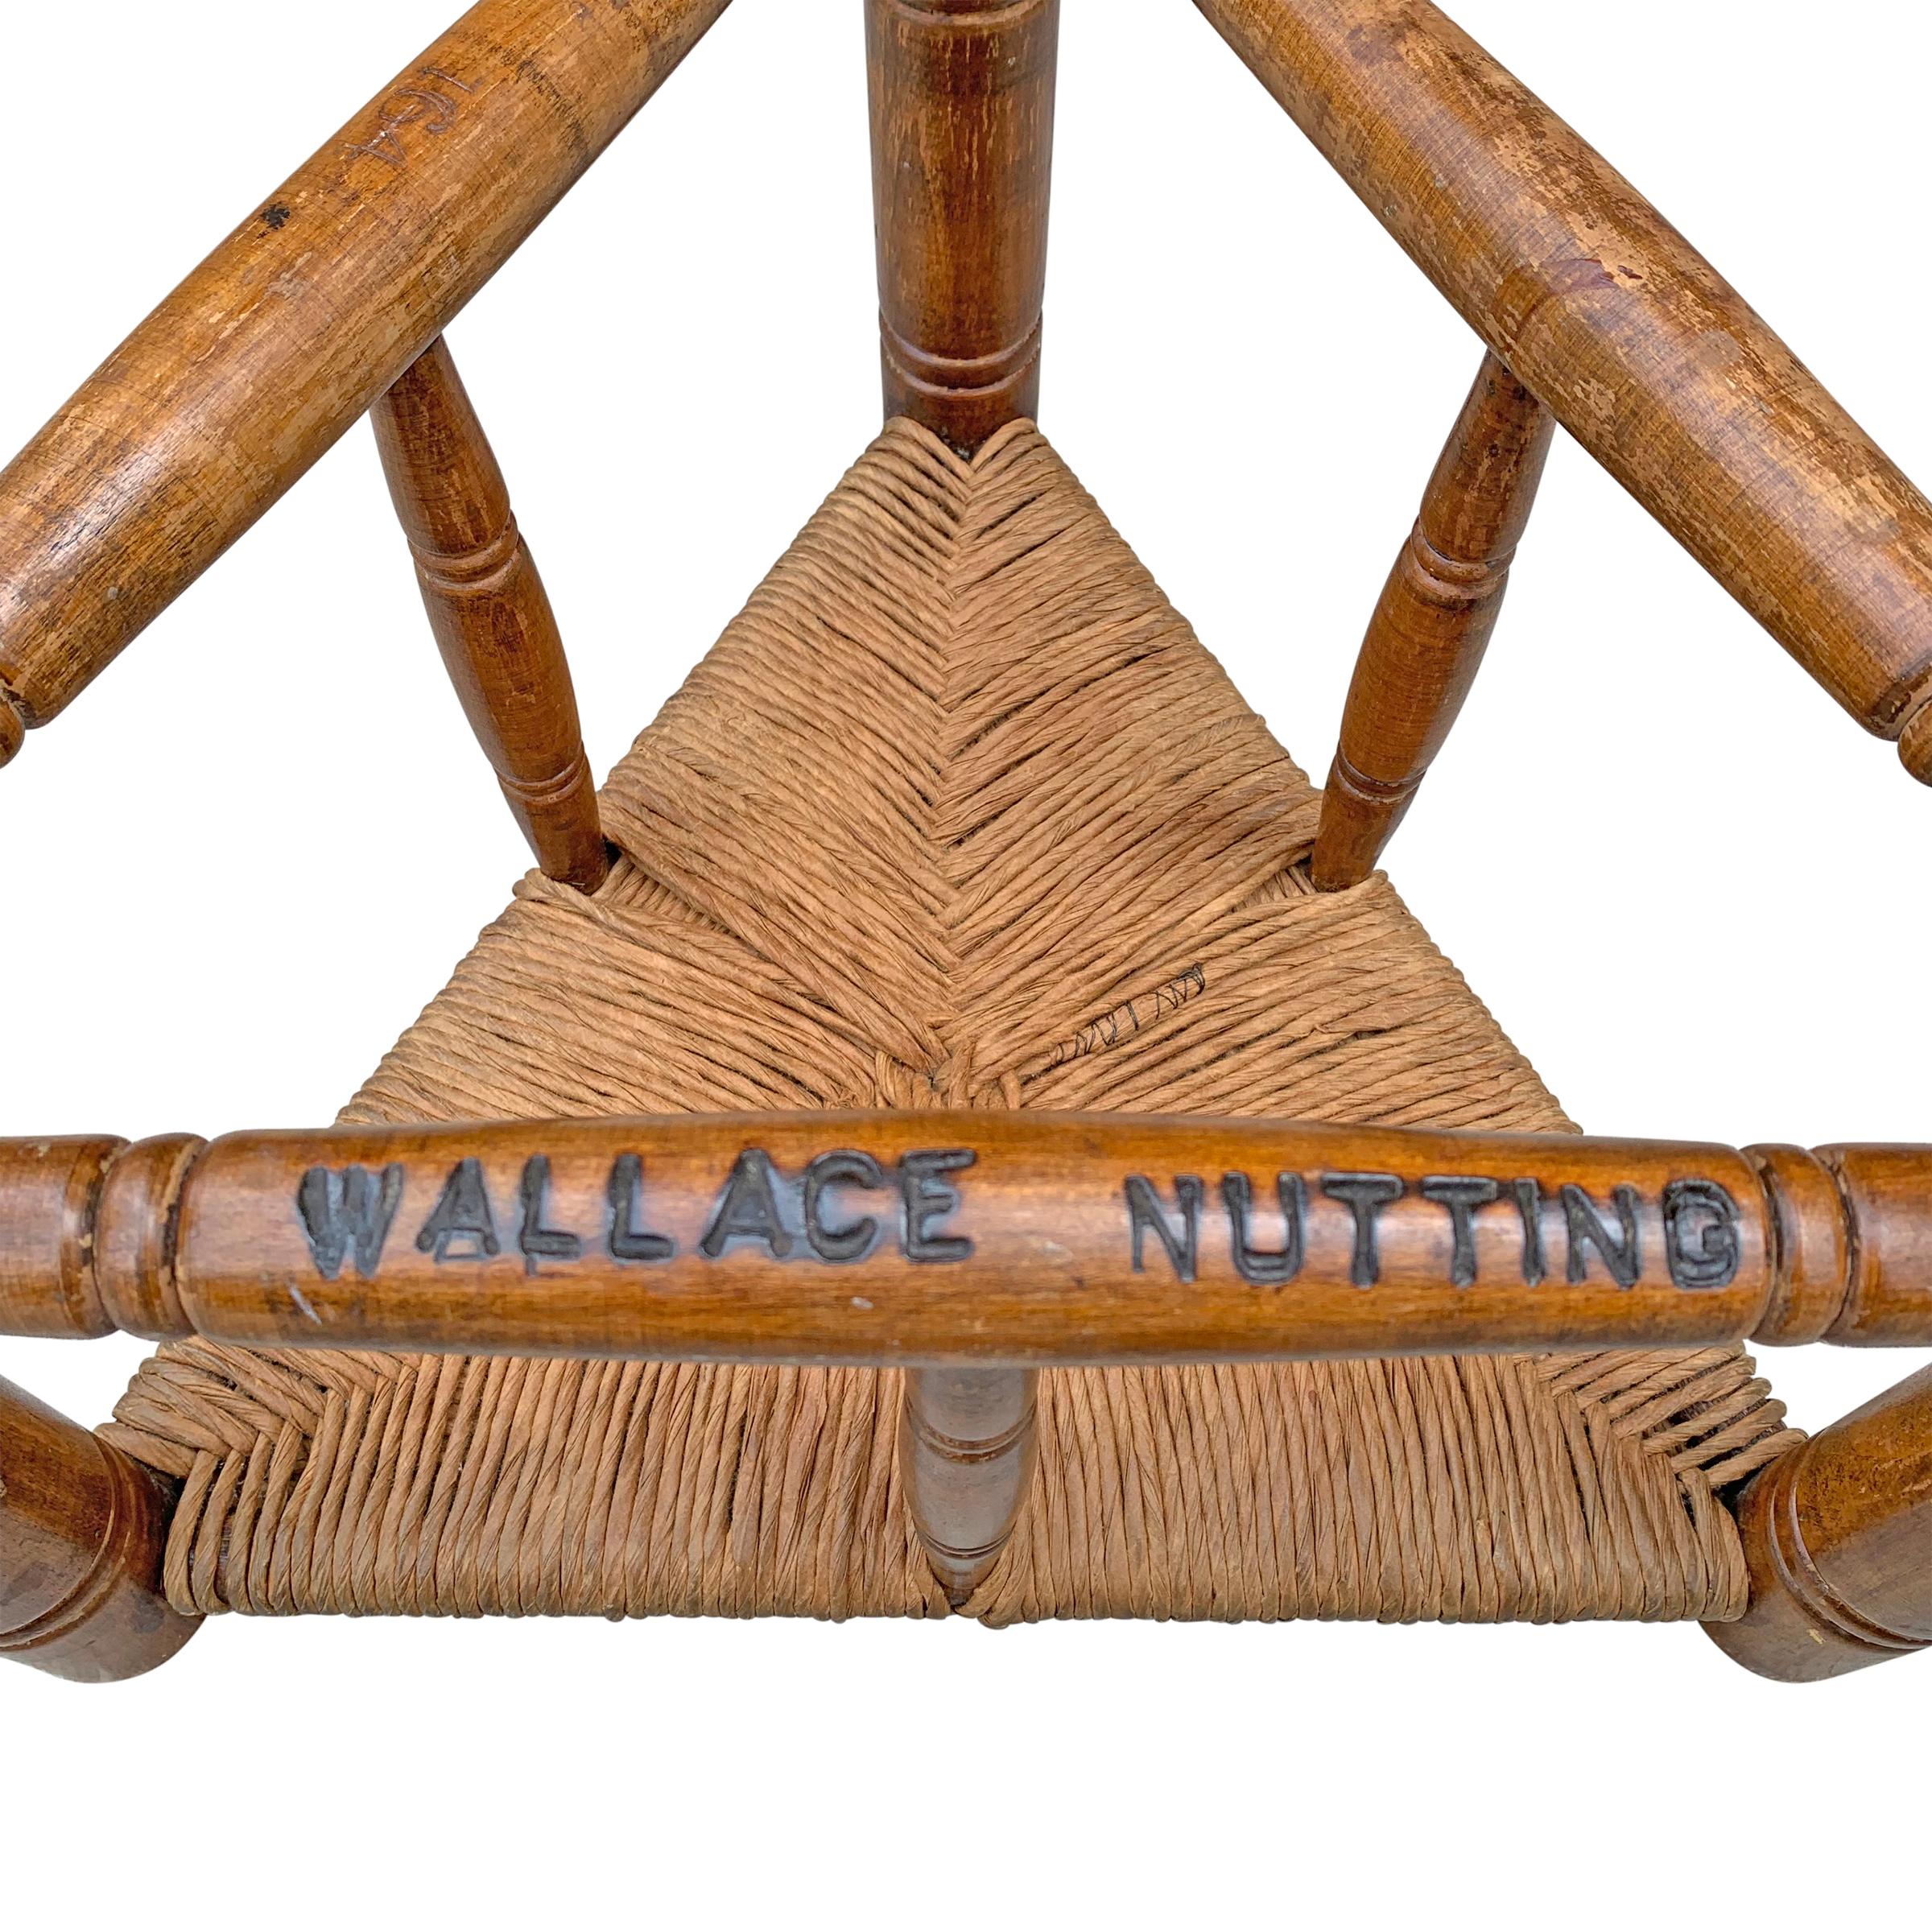 Three-Legged Stool with a Woven Rush Seat by Wallace Nutting 1